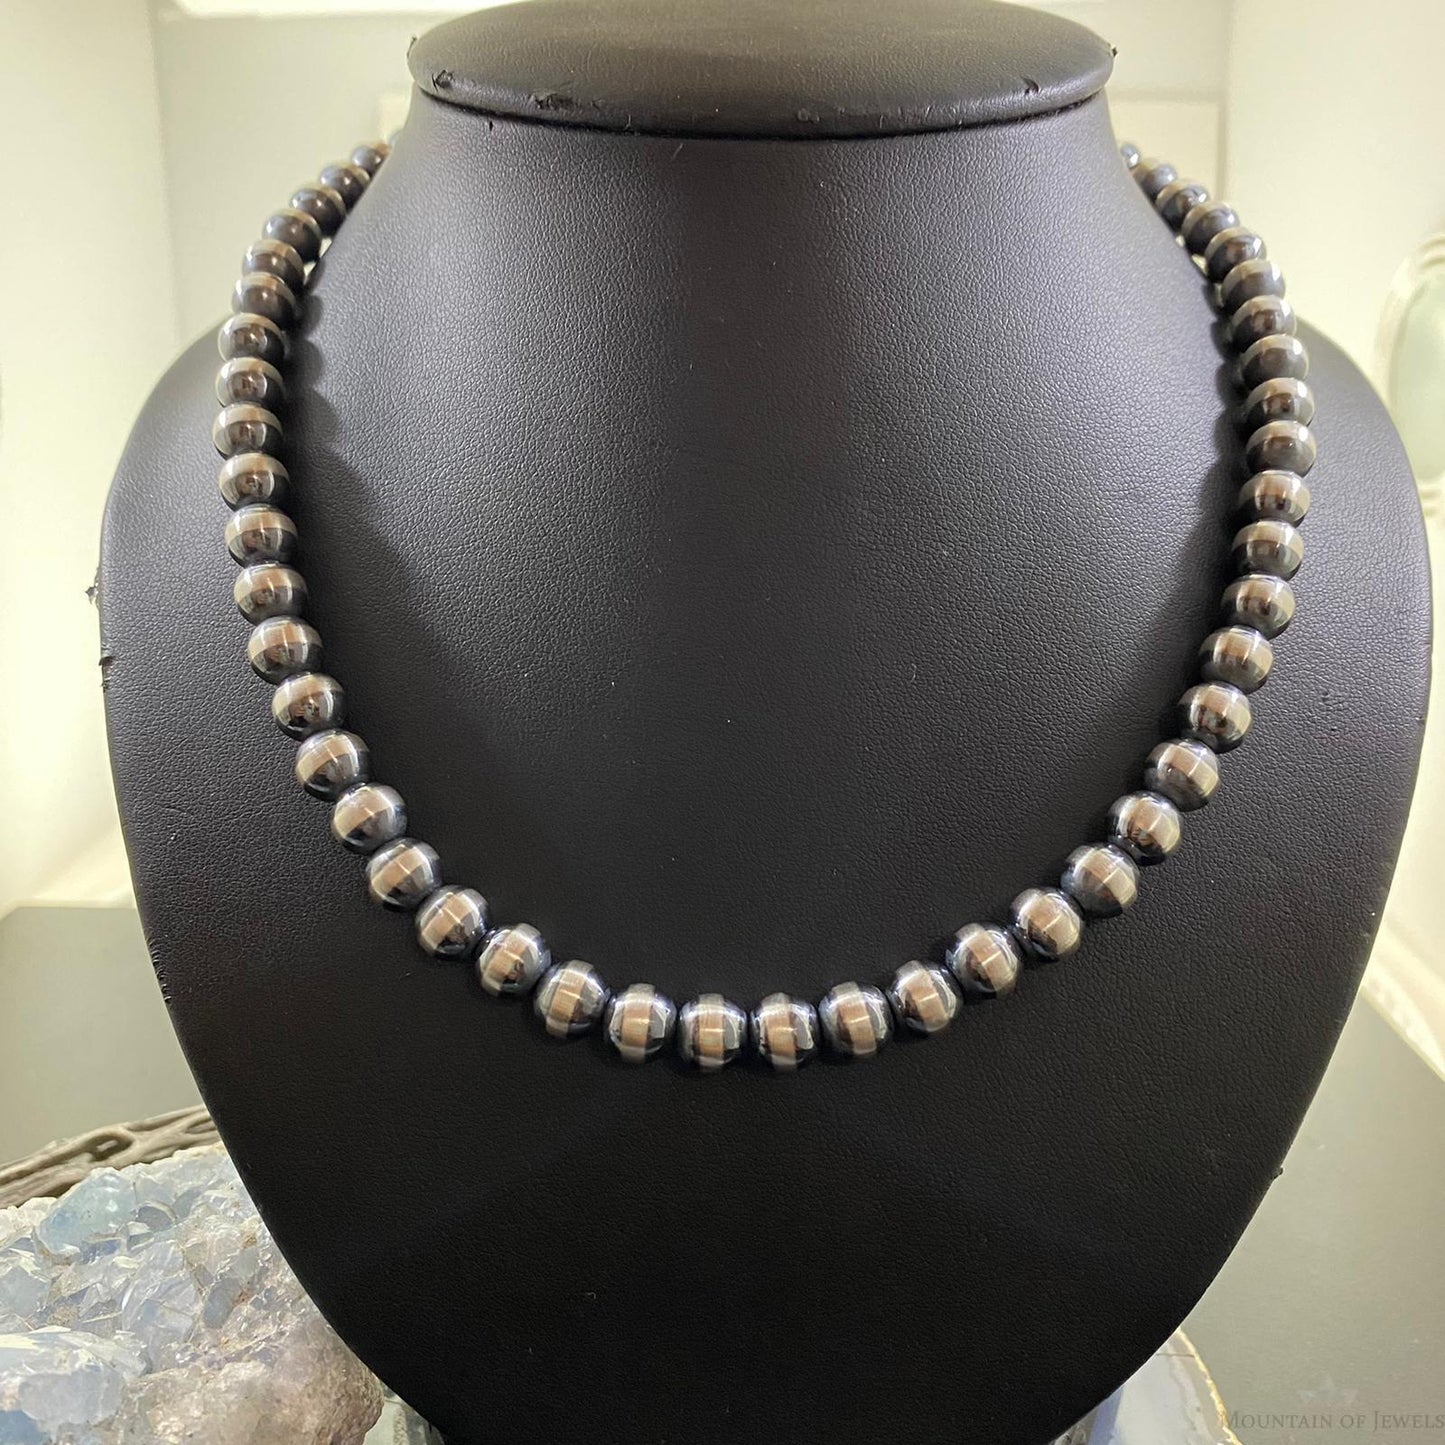 Navajo Pearl Beads 8 mm Sterling Silver Necklace Length 22" For Women